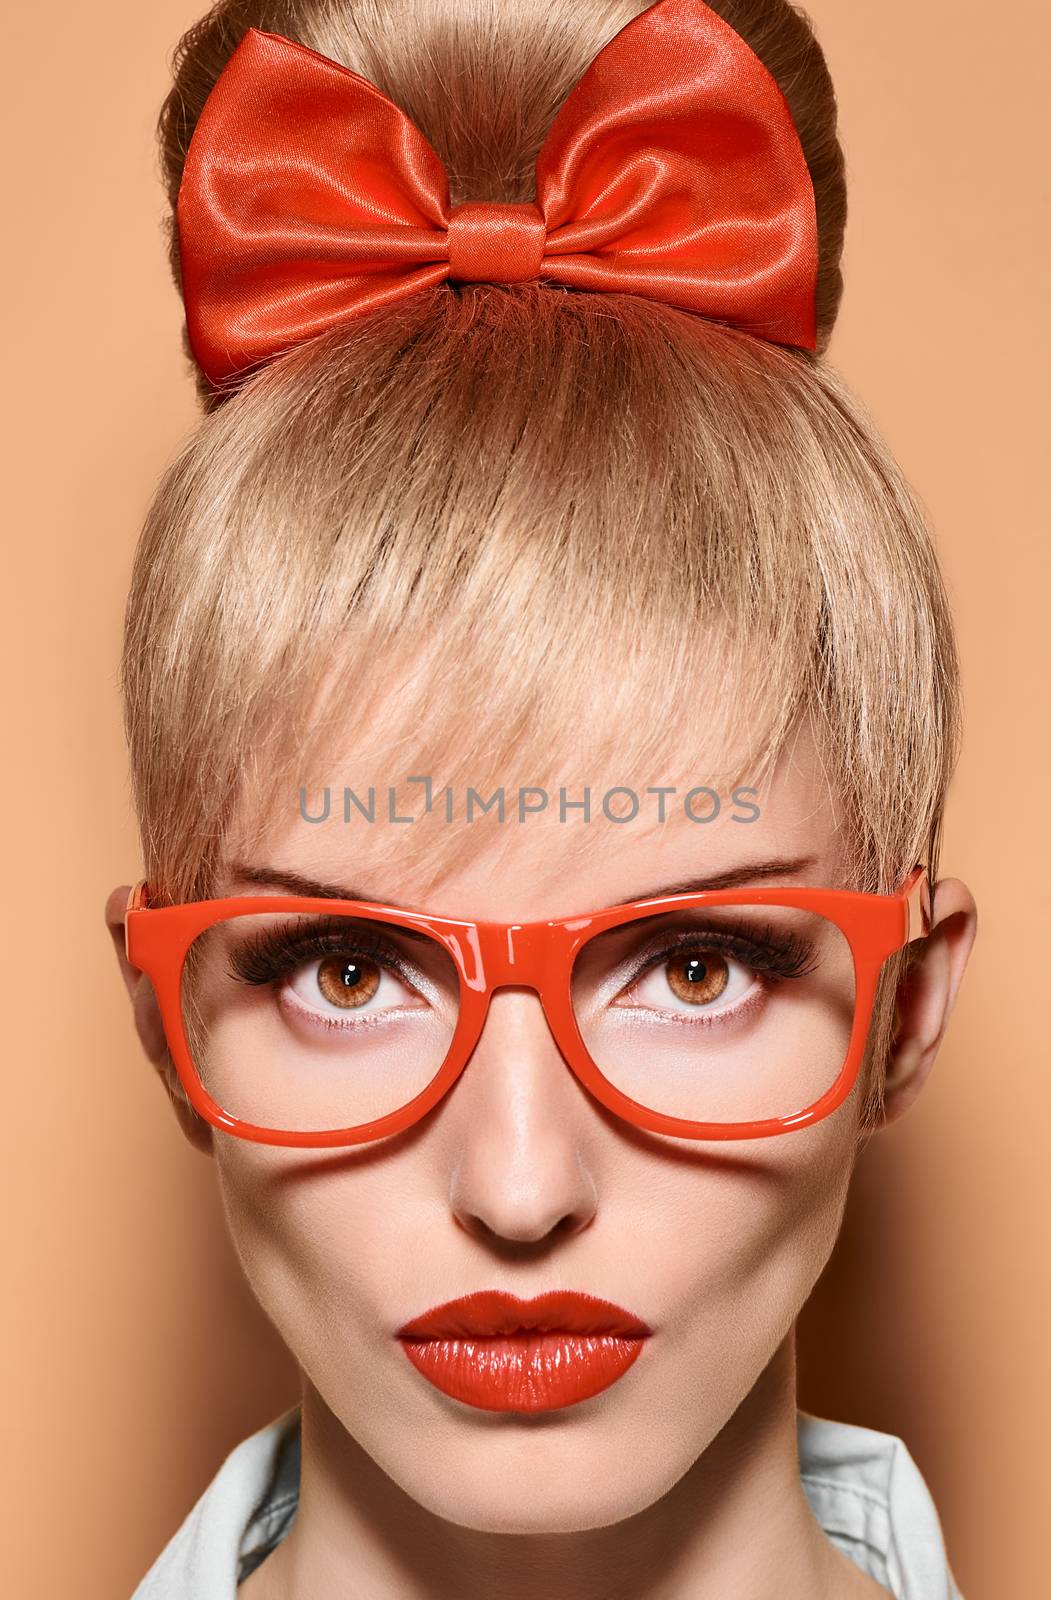 Beauty fashion portrait woman in stylish glasses. Attractive pretty blonde sexy hipster girl. Confidence, success, Pinup hairstyle, trendy red bow makeup,lips.Unusual playful, creative.Vintage,vanilla